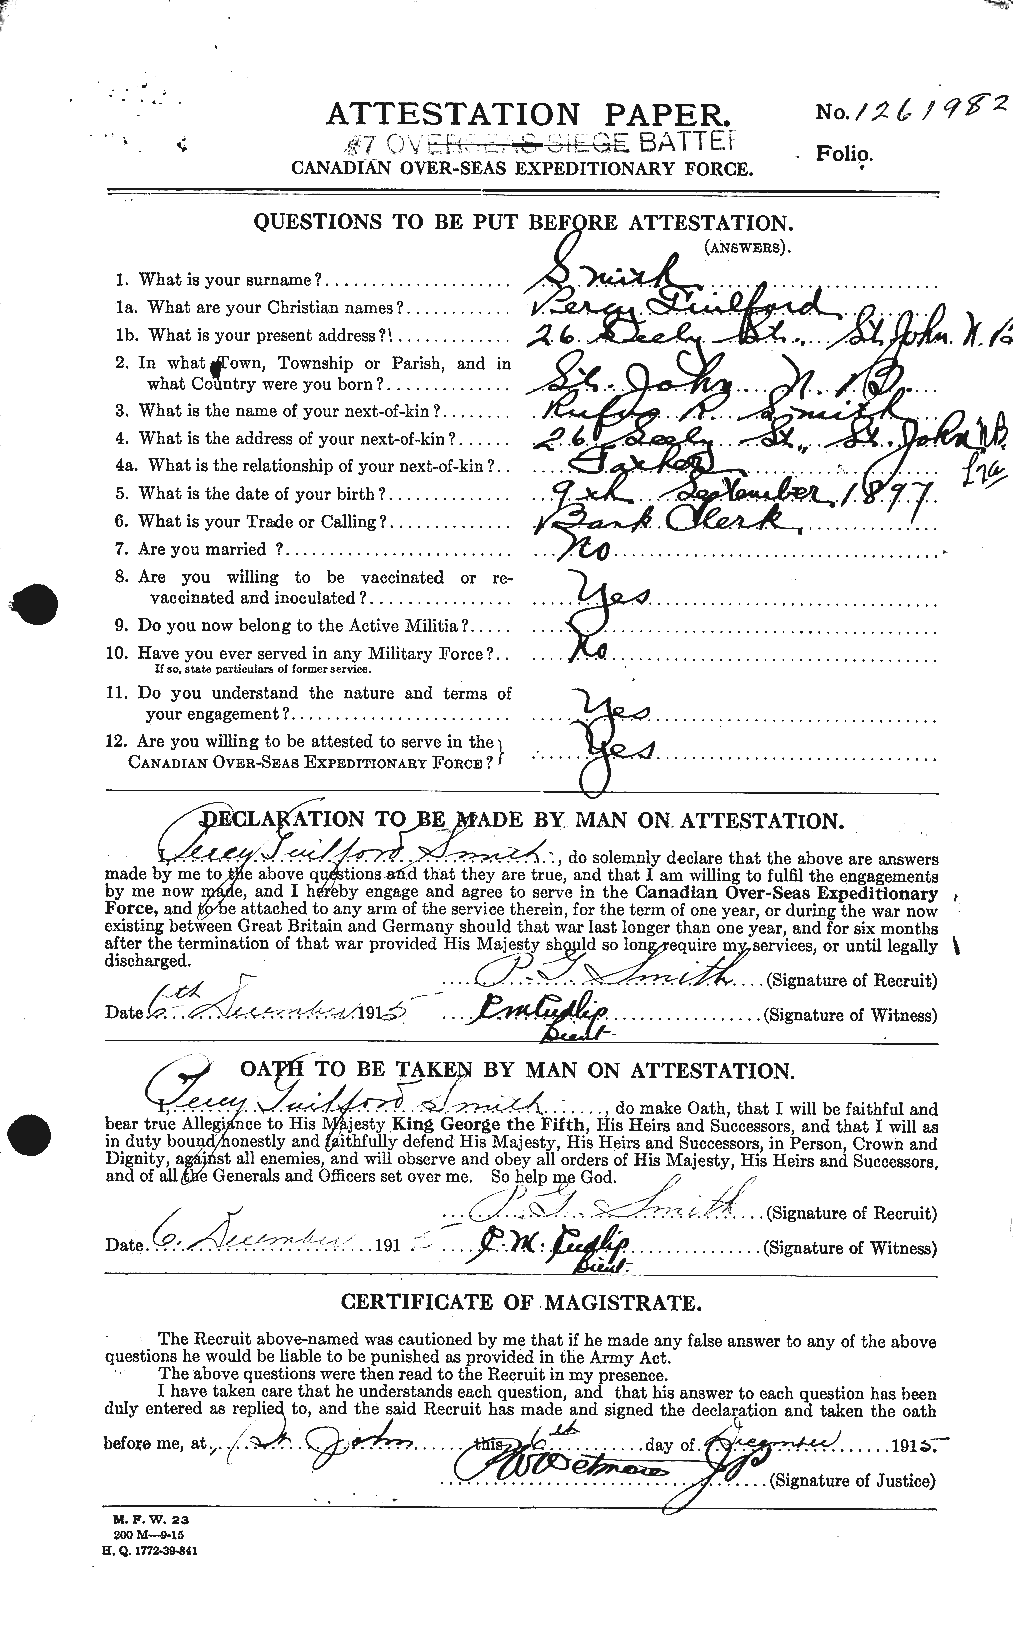 Personnel Records of the First World War - CEF 622183a